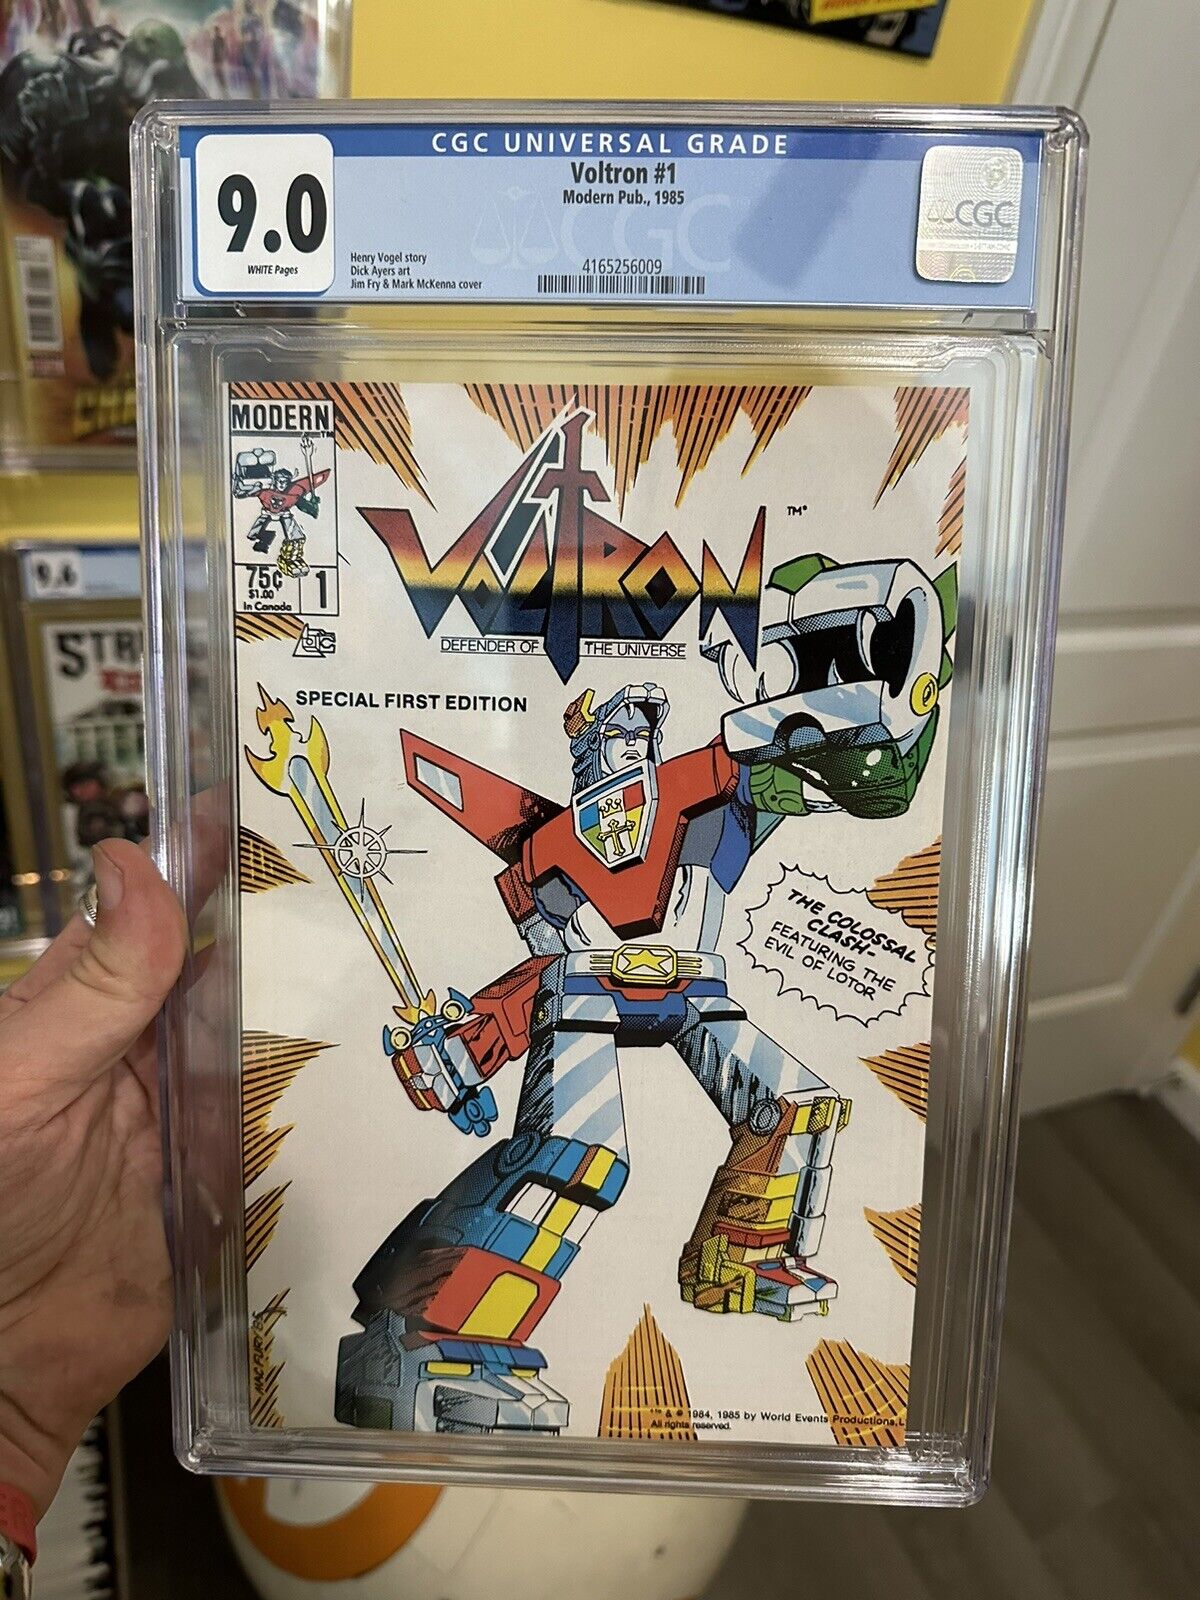 Voltron #1 (Modern Publications, 1985) 1st Print, 1st Appearance CGC 9.0 VF/NM